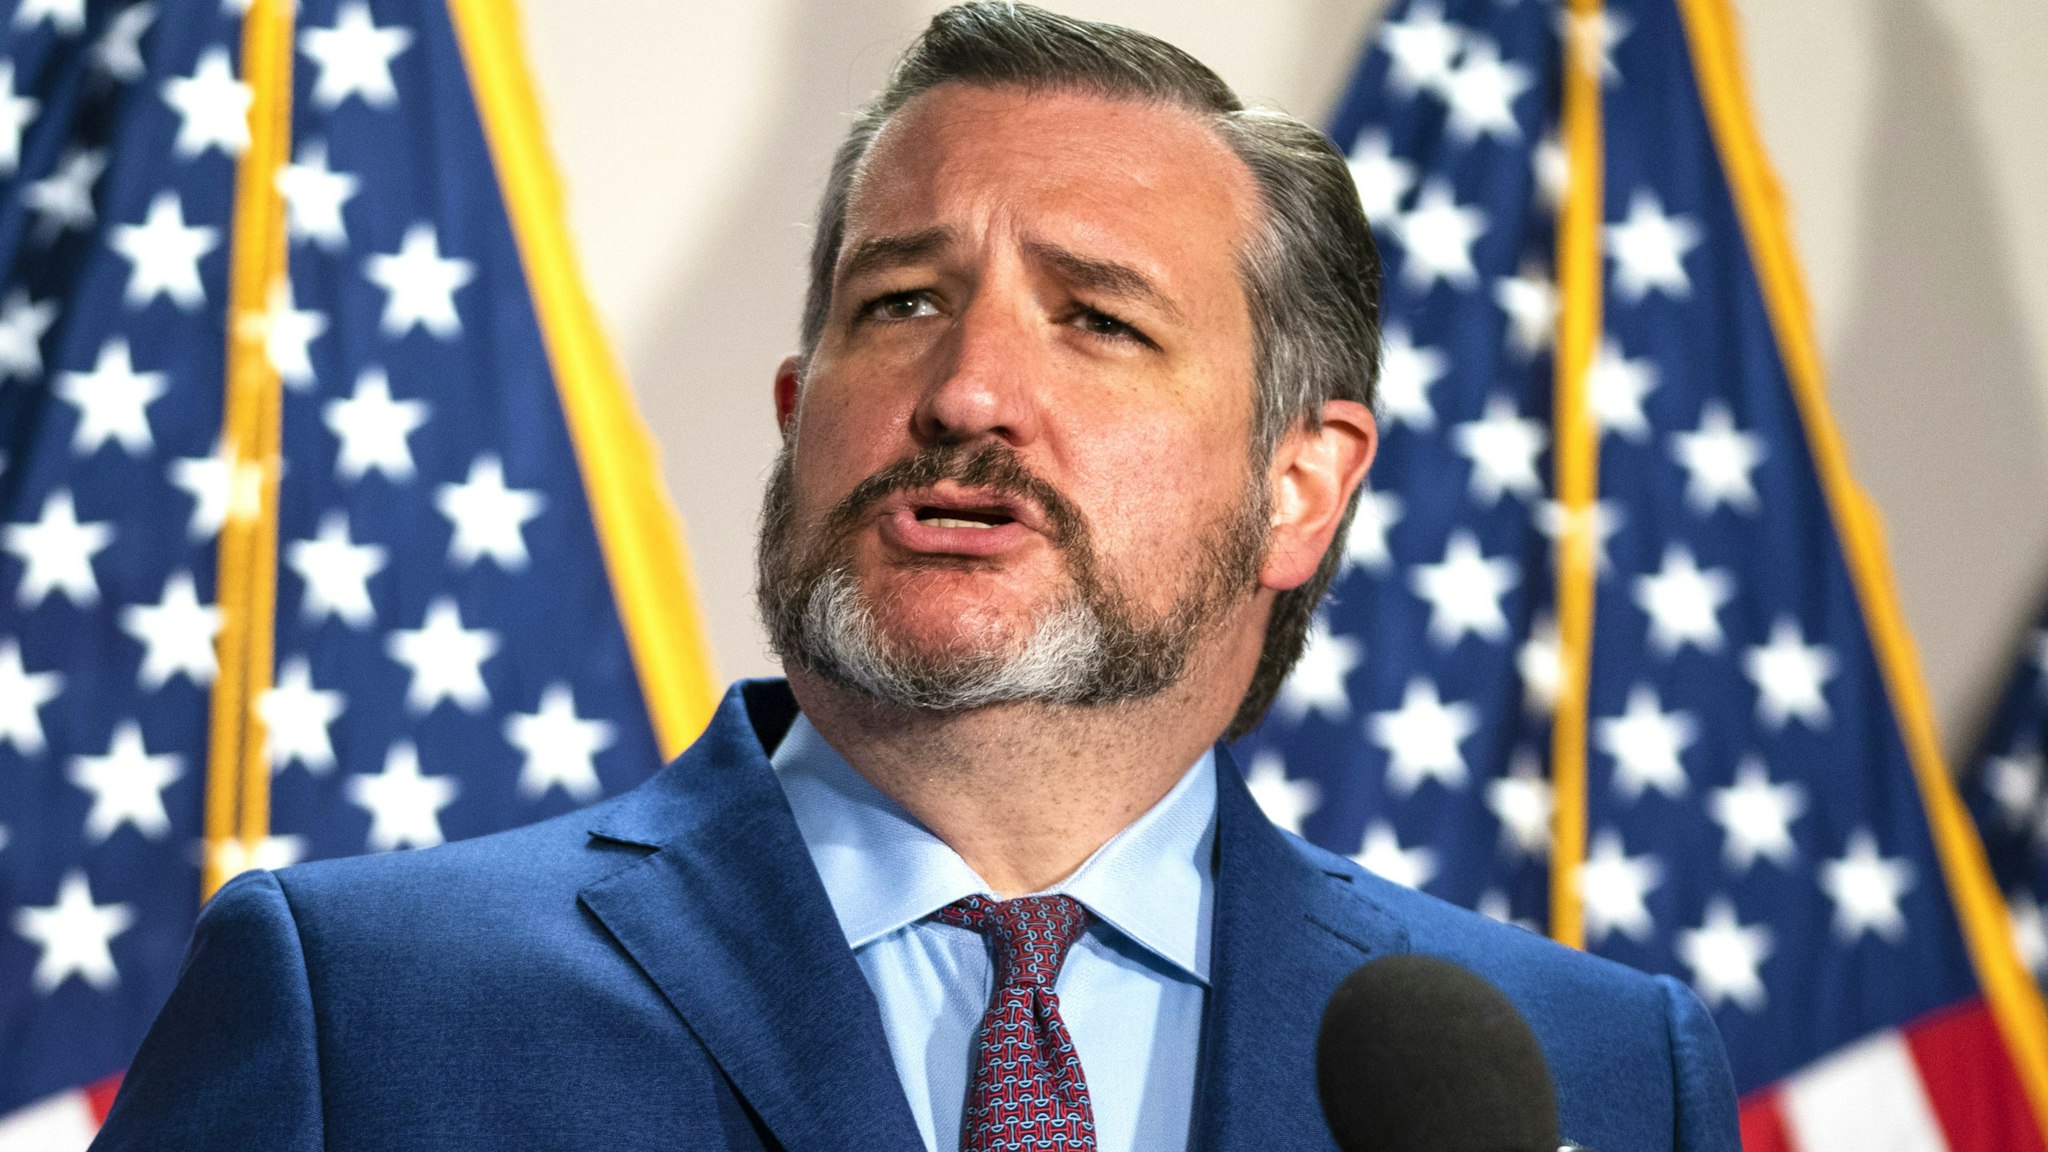 Senator Ted Cruz, a Republican from Texas, speaks during a news conference following the weekly Senate Republican caucus luncheon in Washington, D.C., U.S., on Tuesday, June 2, 2020. Senate Majority Leader Mitch McConnell will attempt to expedite approval of changes to the popular Paycheck Protection Program aimed at giving small businesses more flexibility in using the money from the fund, according to Senate aides.